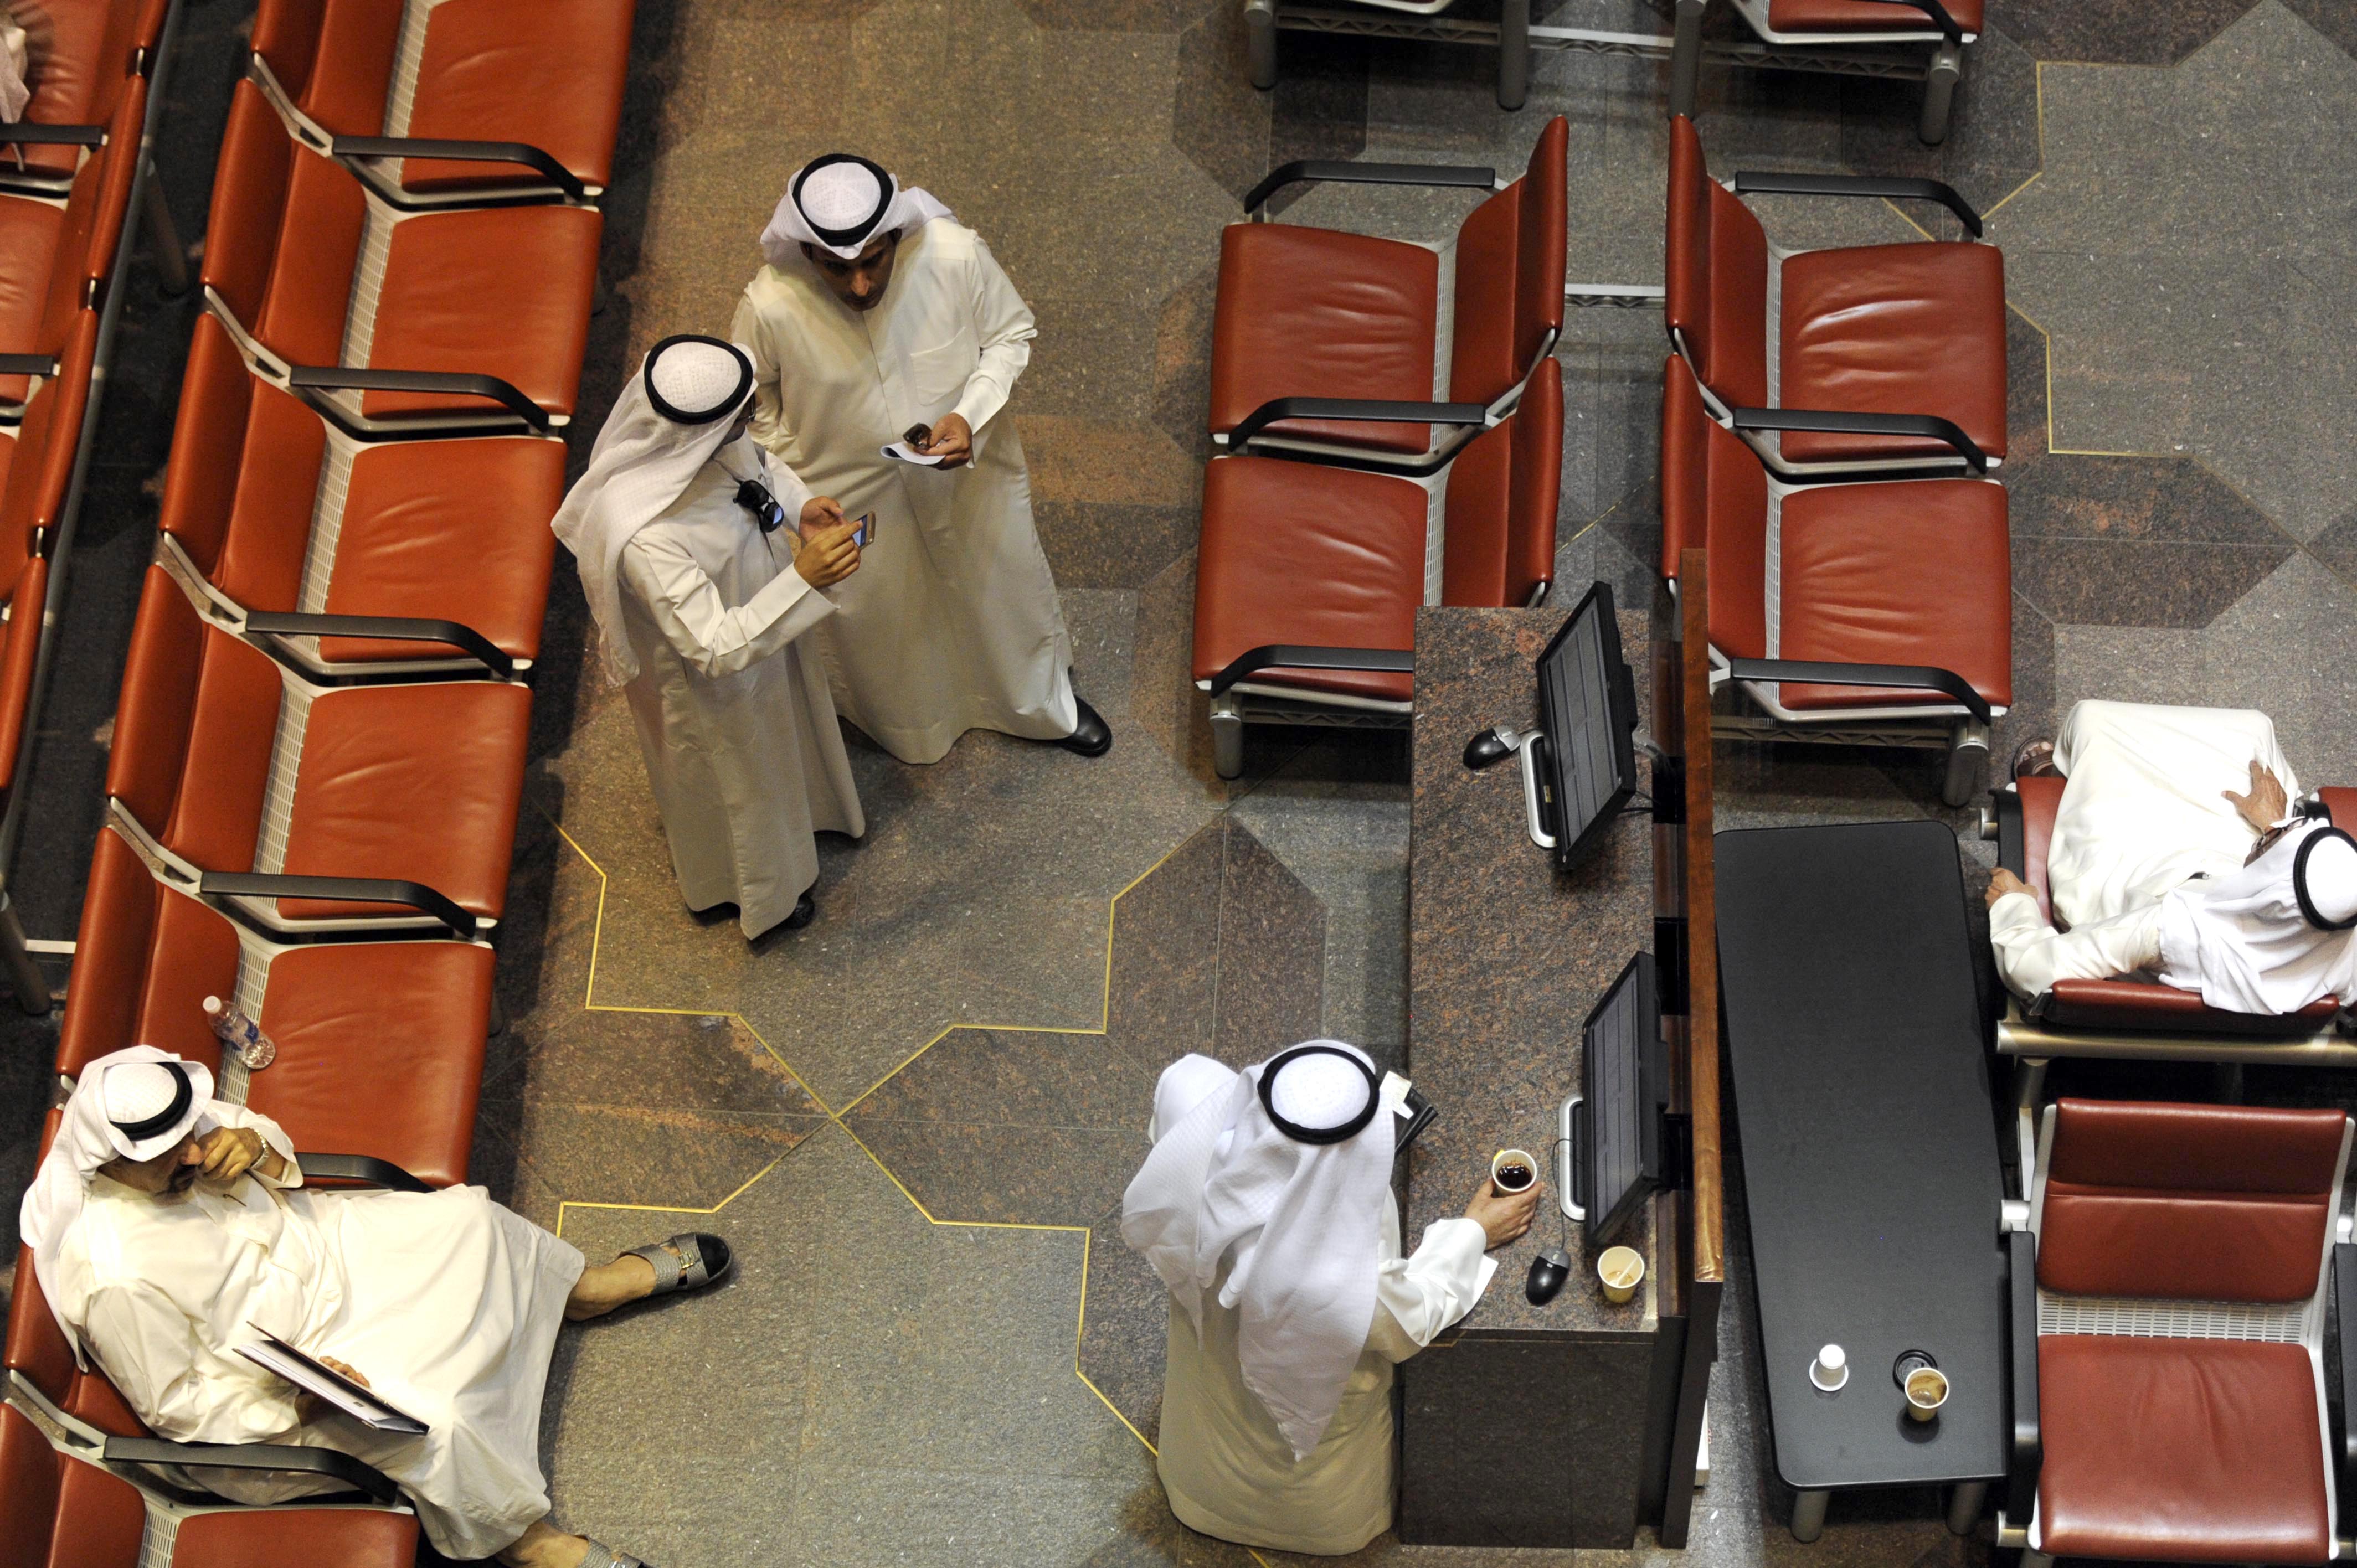 Kuwait bourse ends trading in green zone                                                                                                                                                                                                                  